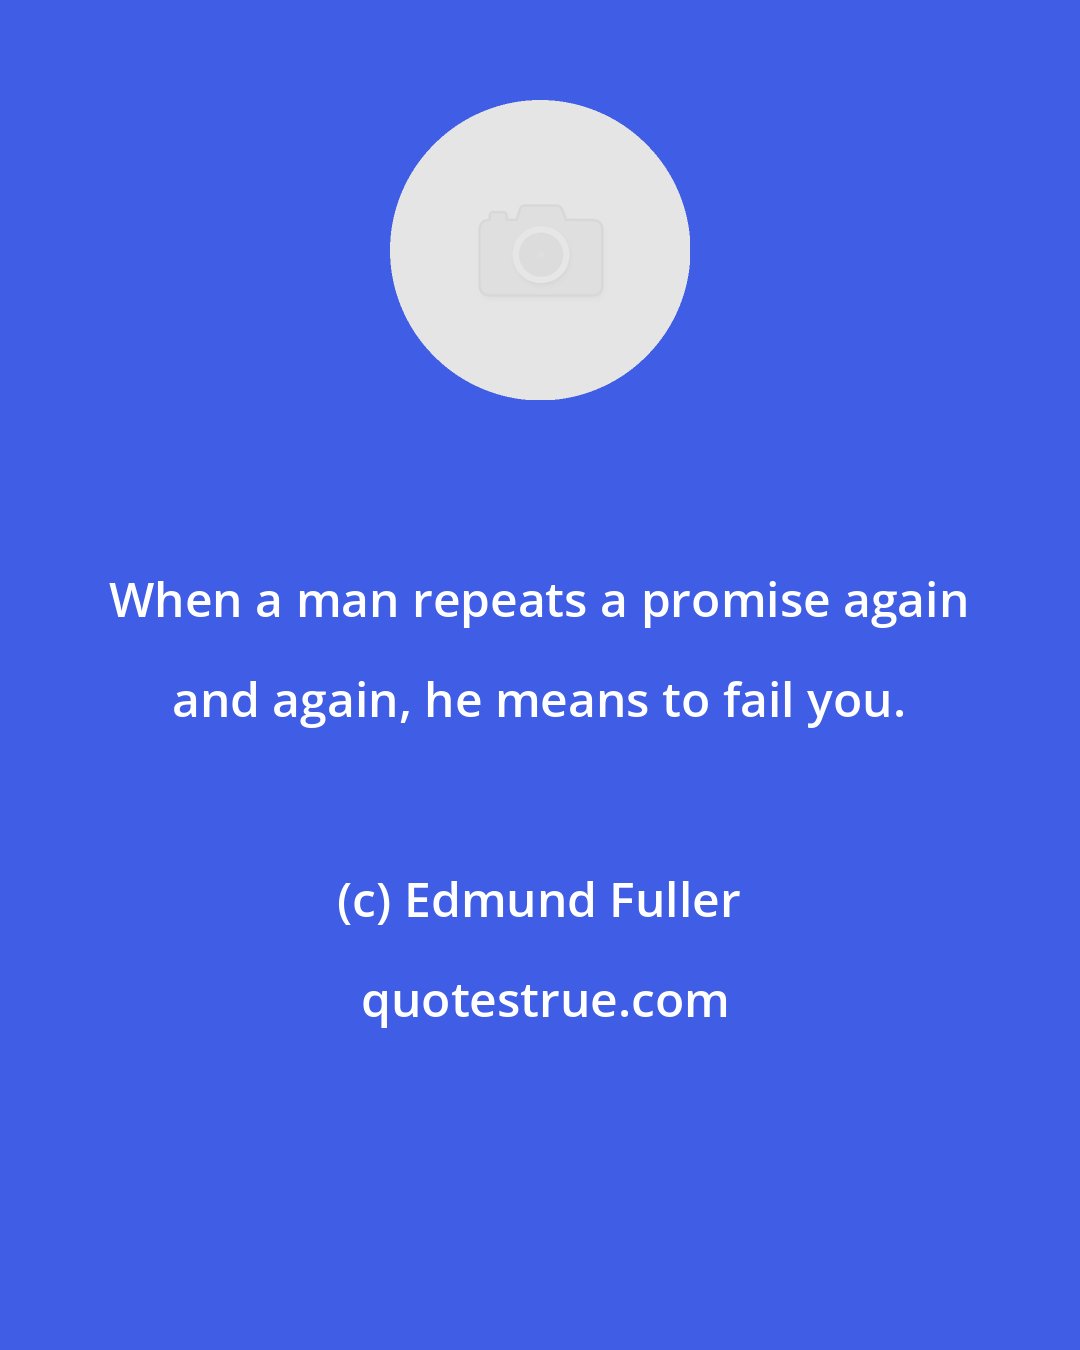 Edmund Fuller: When a man repeats a promise again and again, he means to fail you.